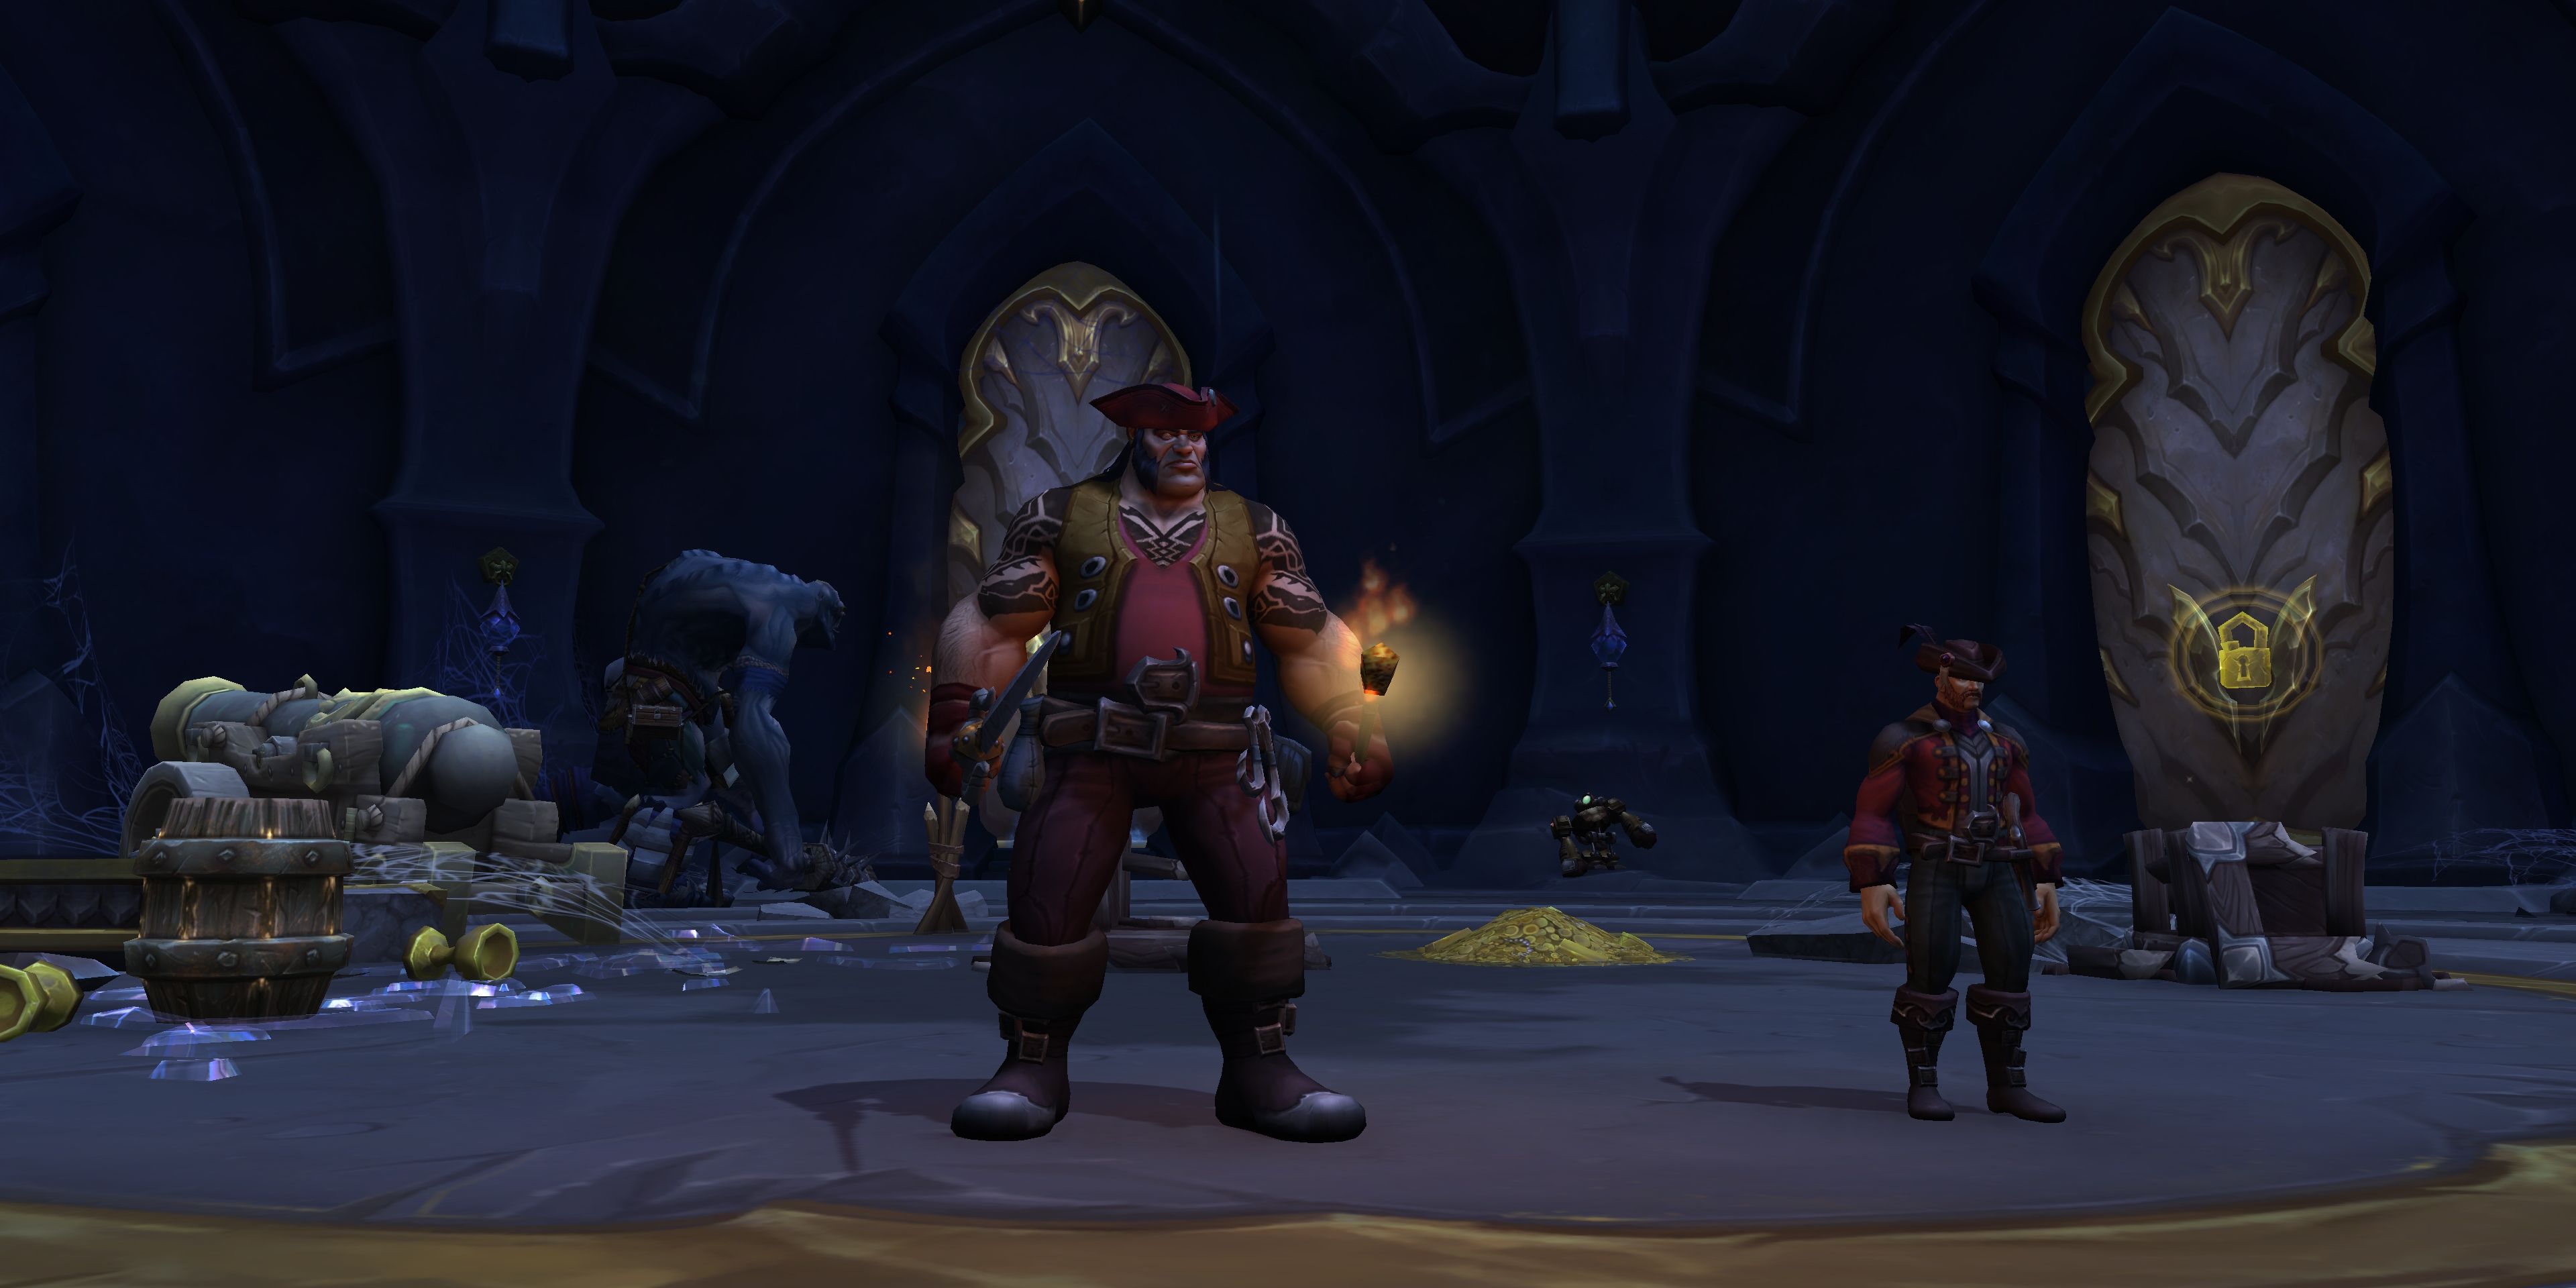 Inside the Zskera Vaults in WoW Dragonflight, two pirate NPC's stand guarding some treasure